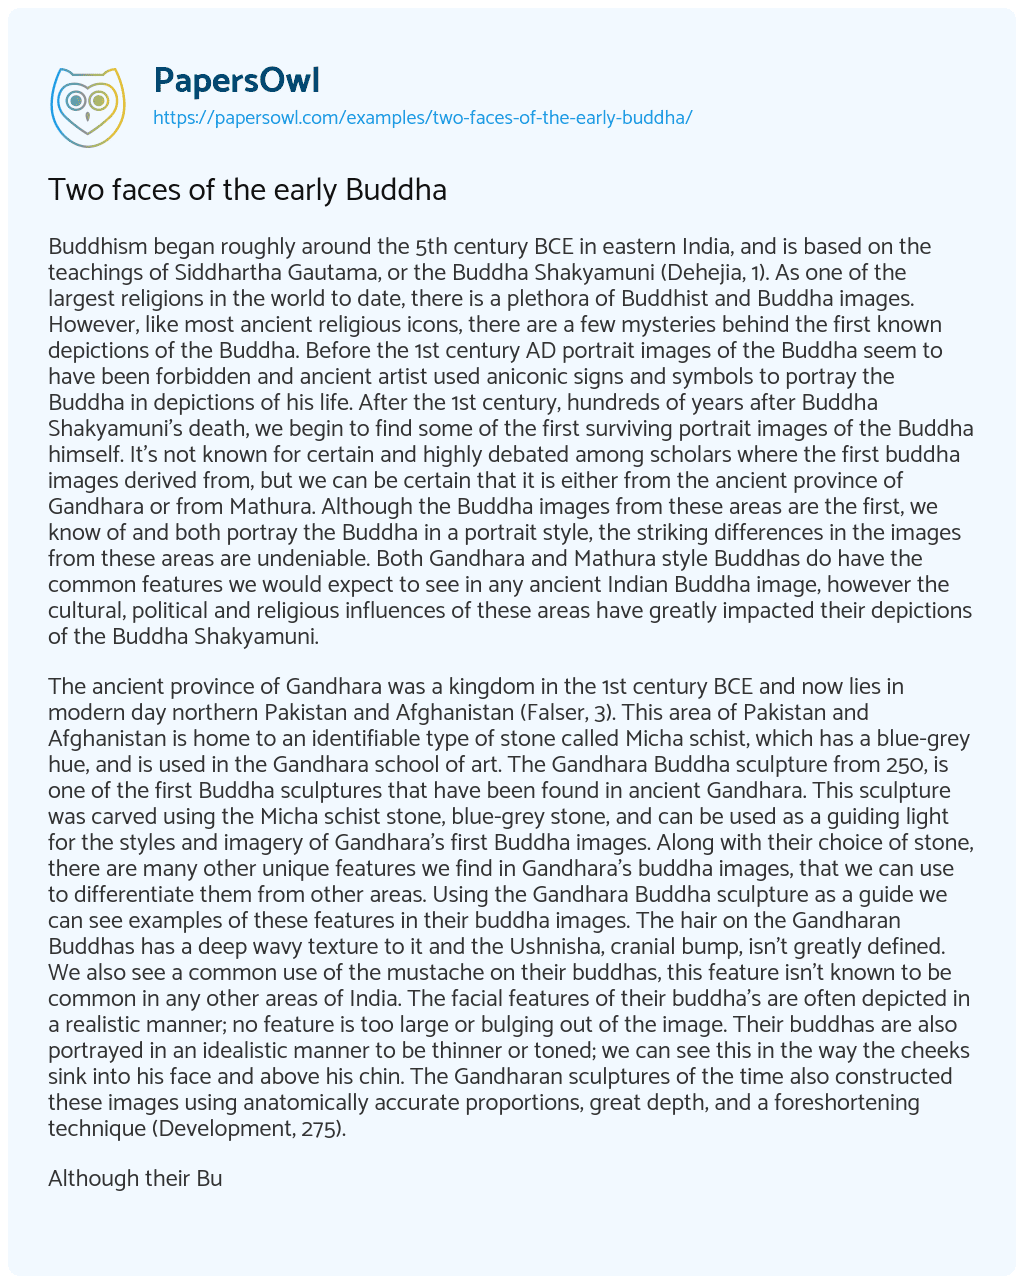 Essay on Two Faces of the Early Buddha